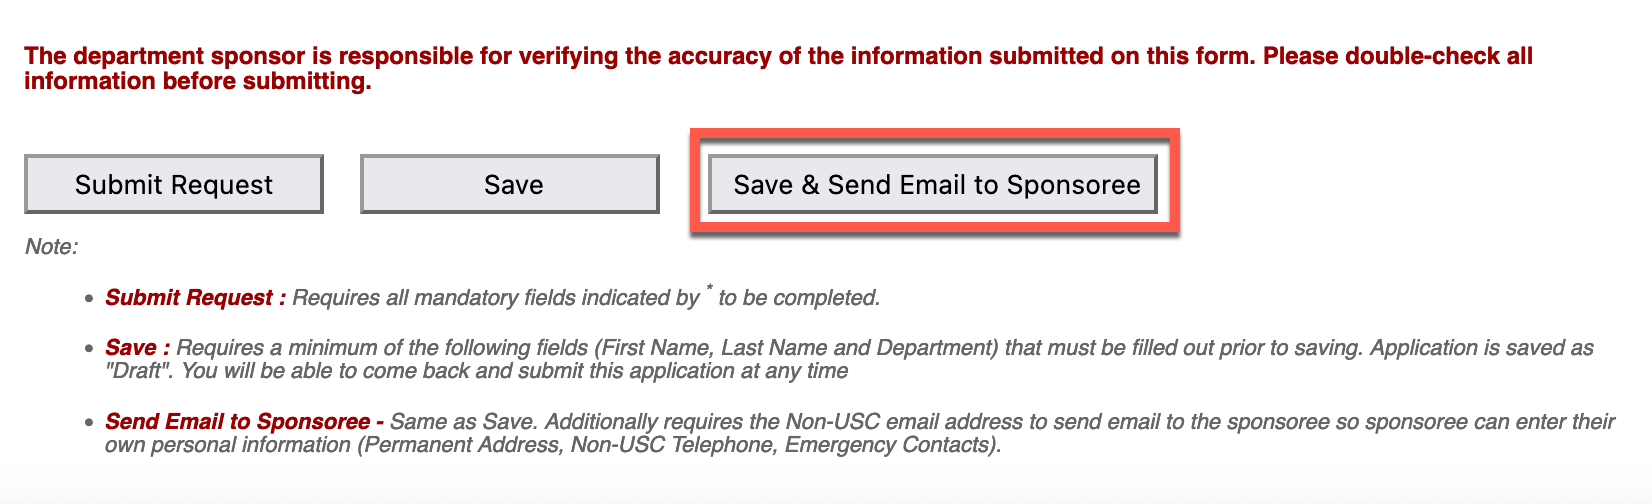 Save and send email to sponsoree